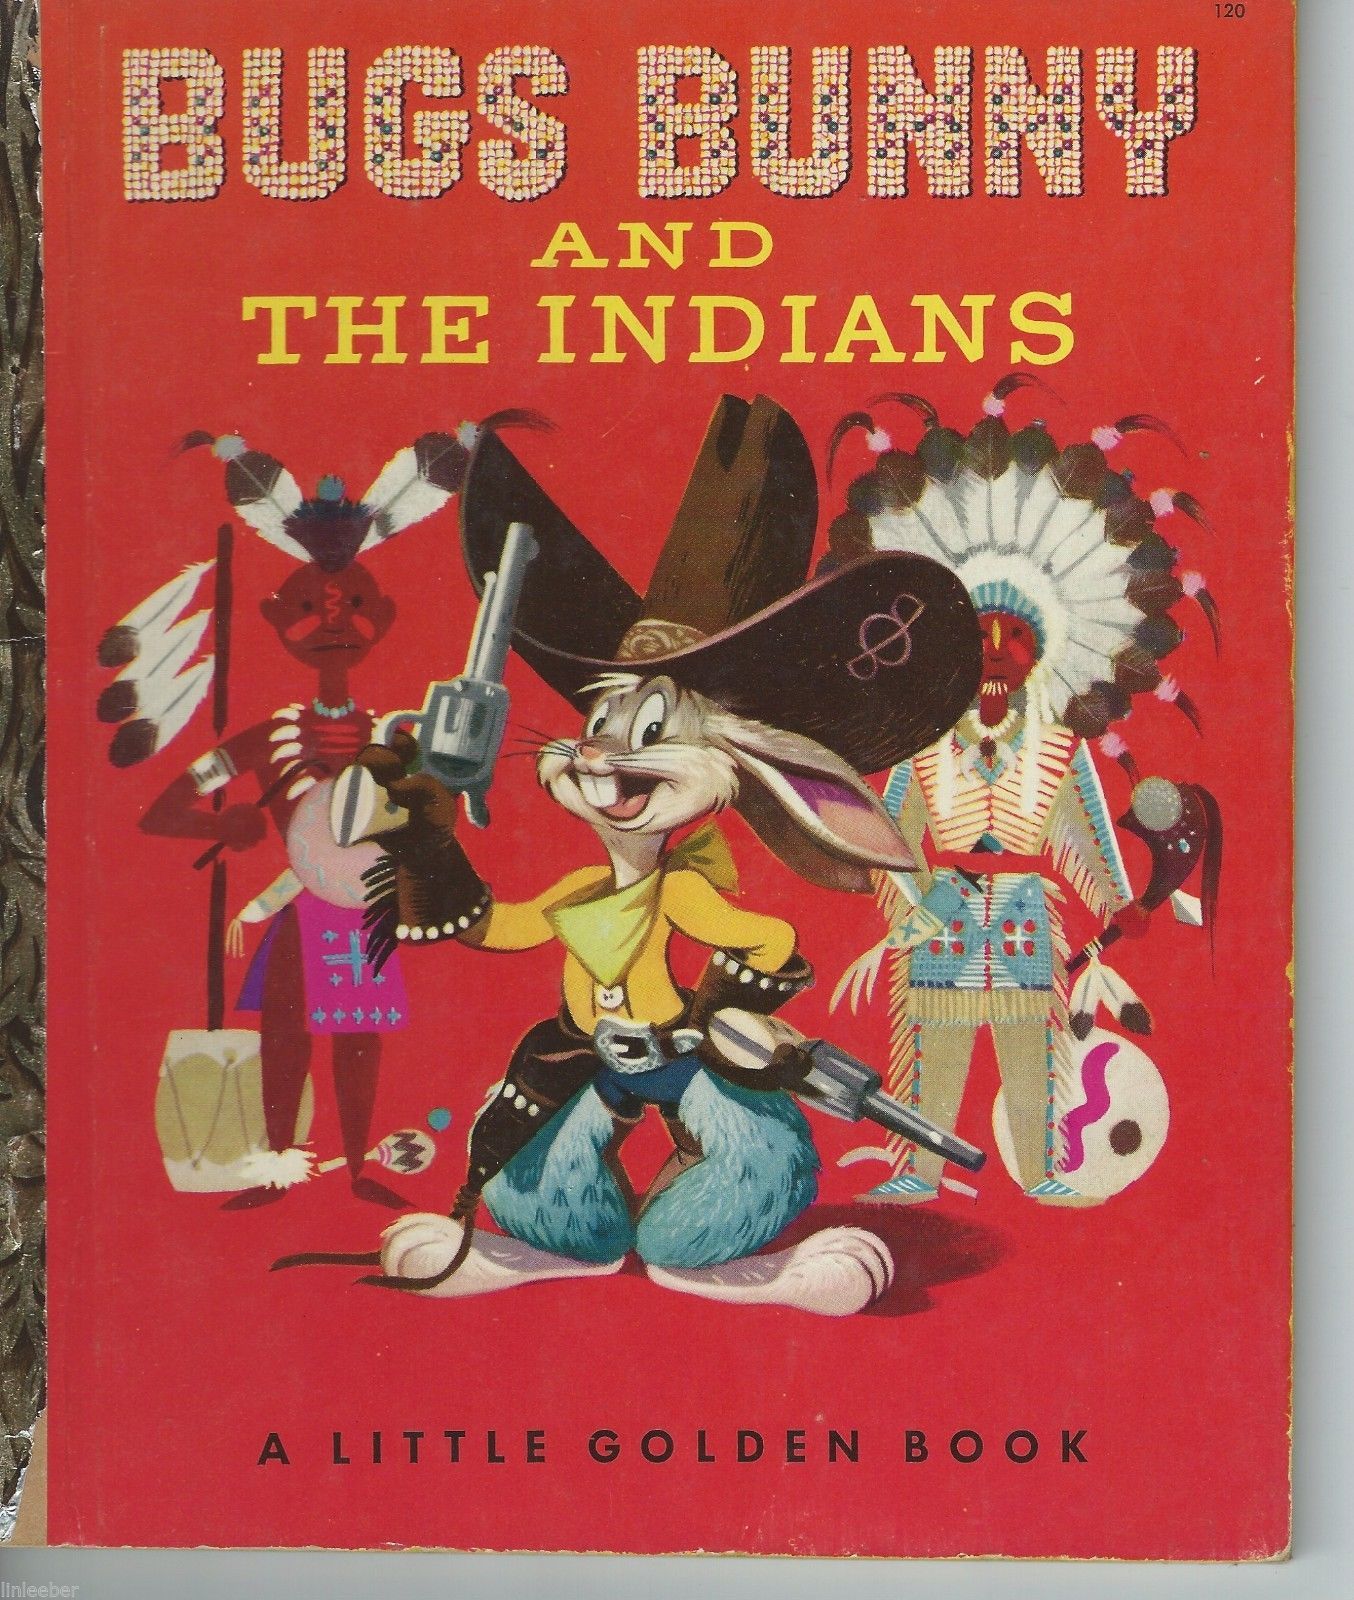 Primary image for 3)Little Golden Books-Disney’s Bugs Bunny-Too Many Carrots;Carrot Machine;Indian